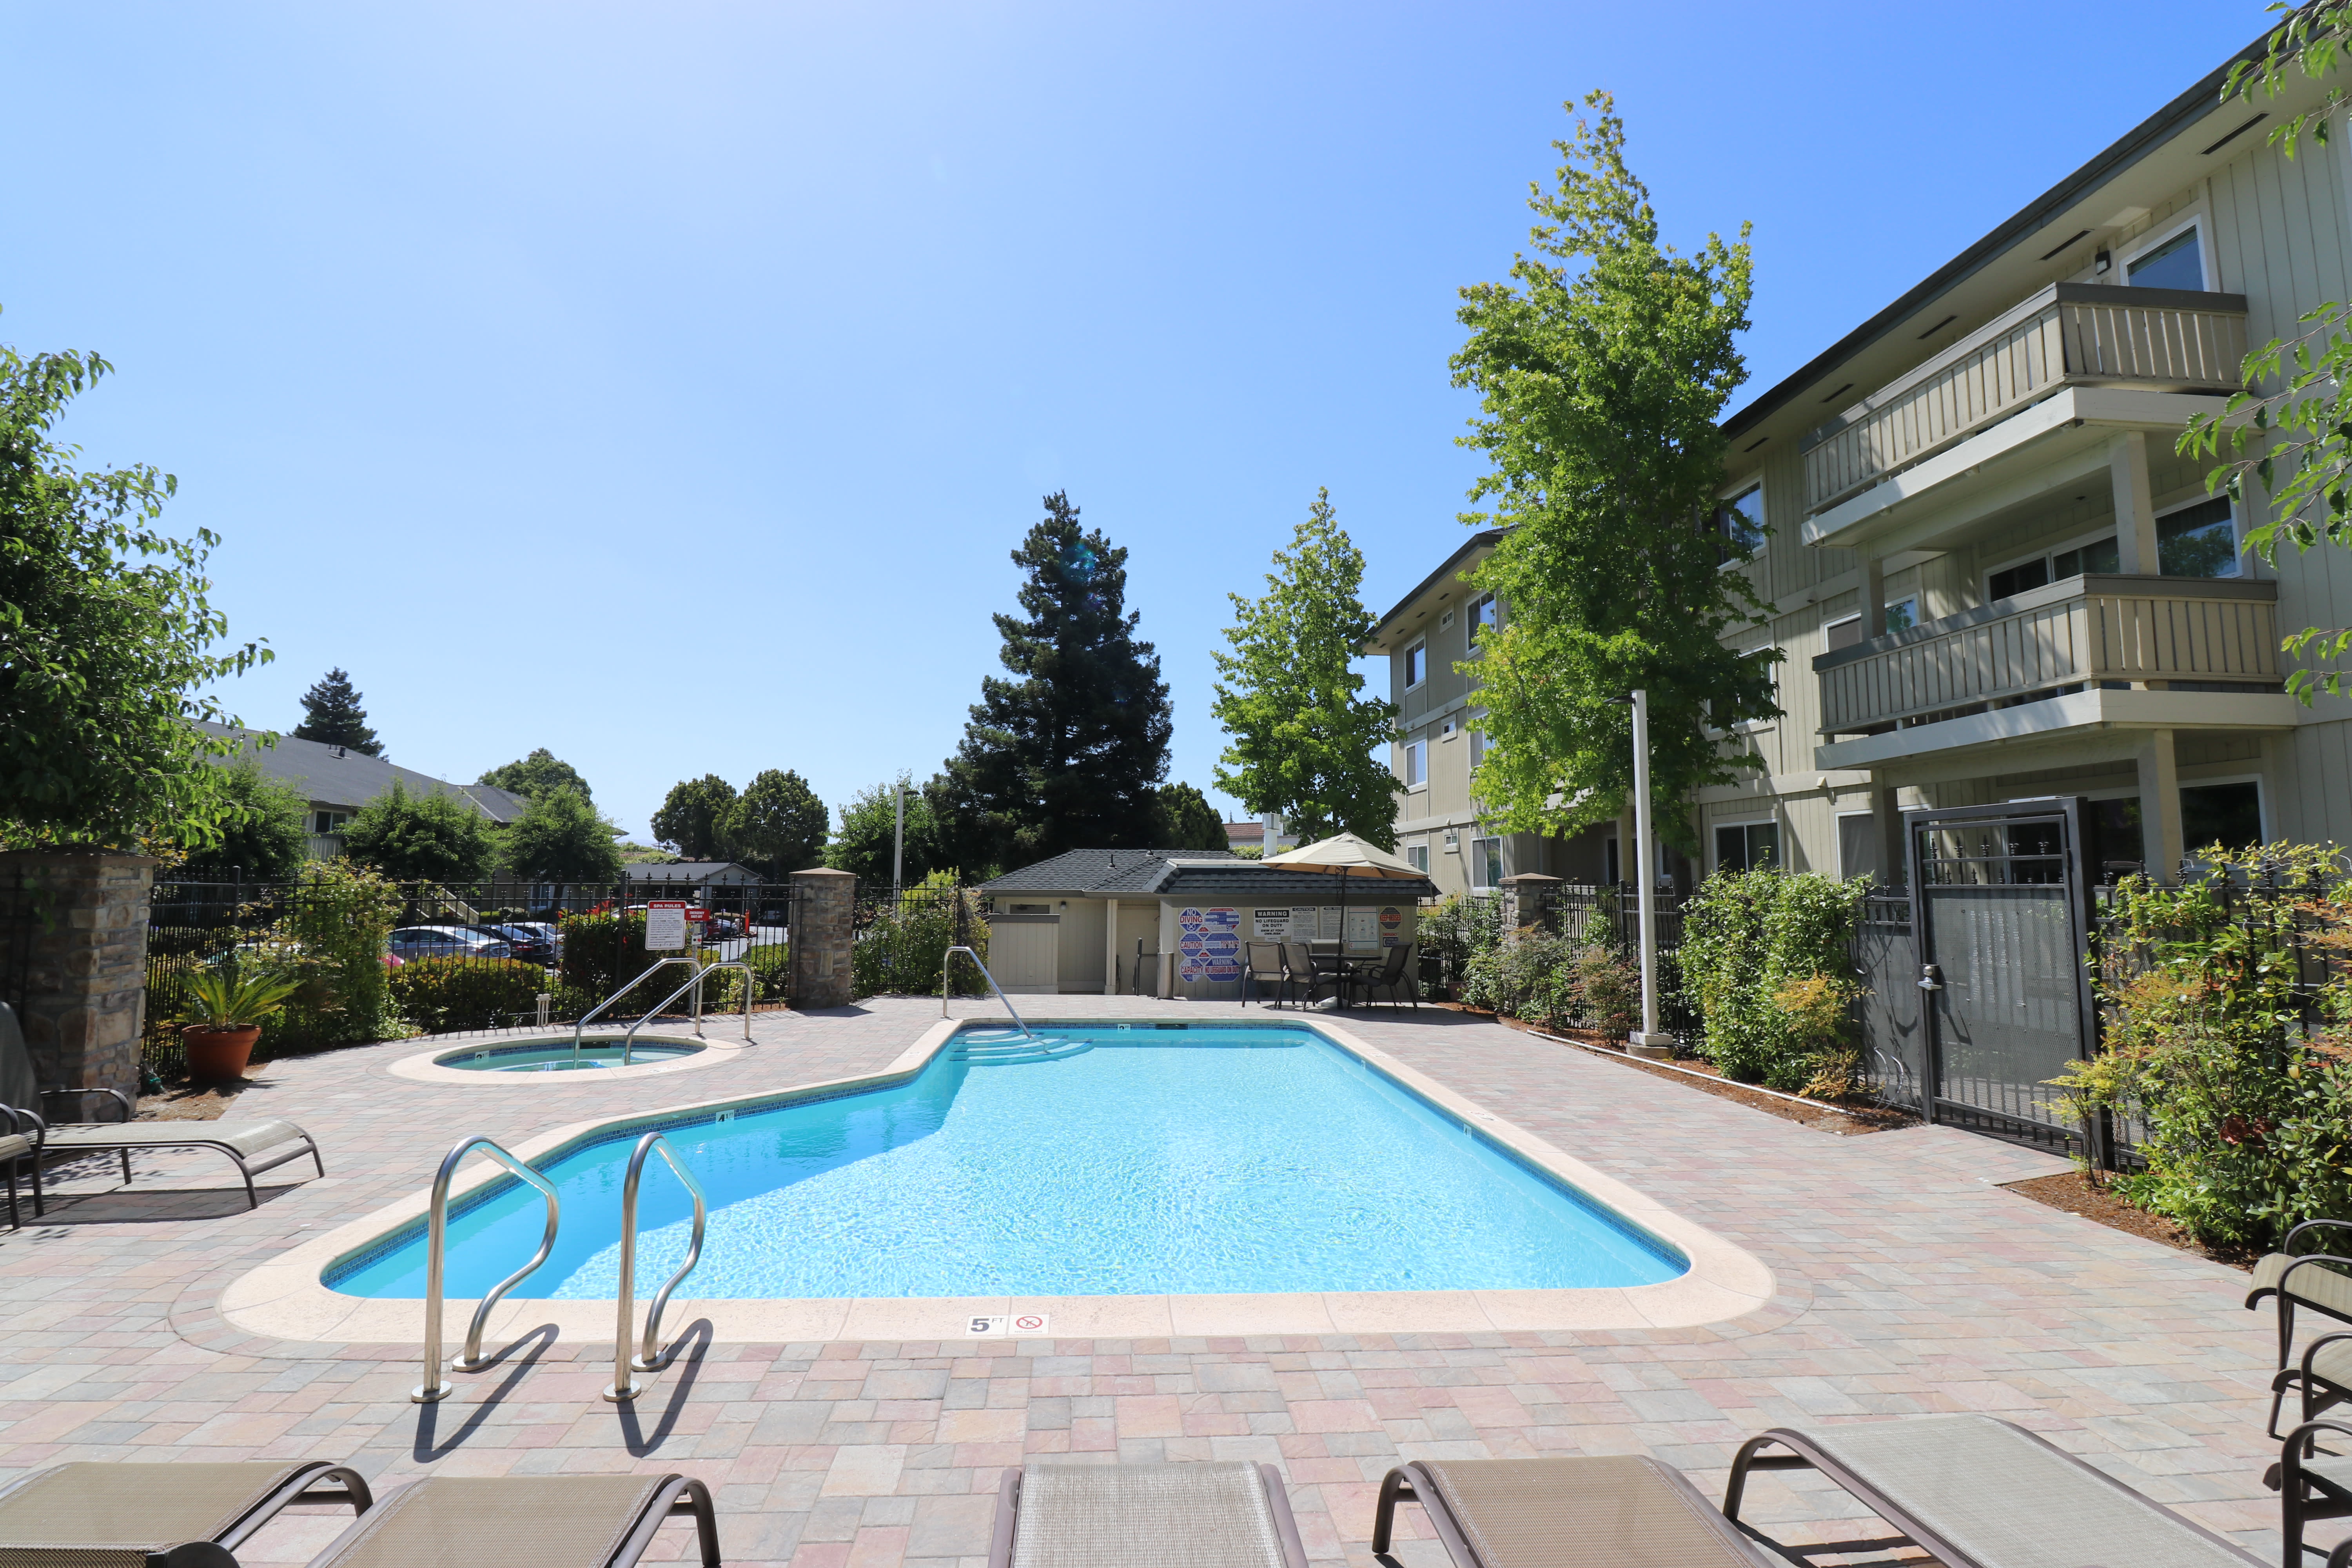 Resort-style swimming pool at Summerhill Terrace Apartment Homes in San Leandro, California